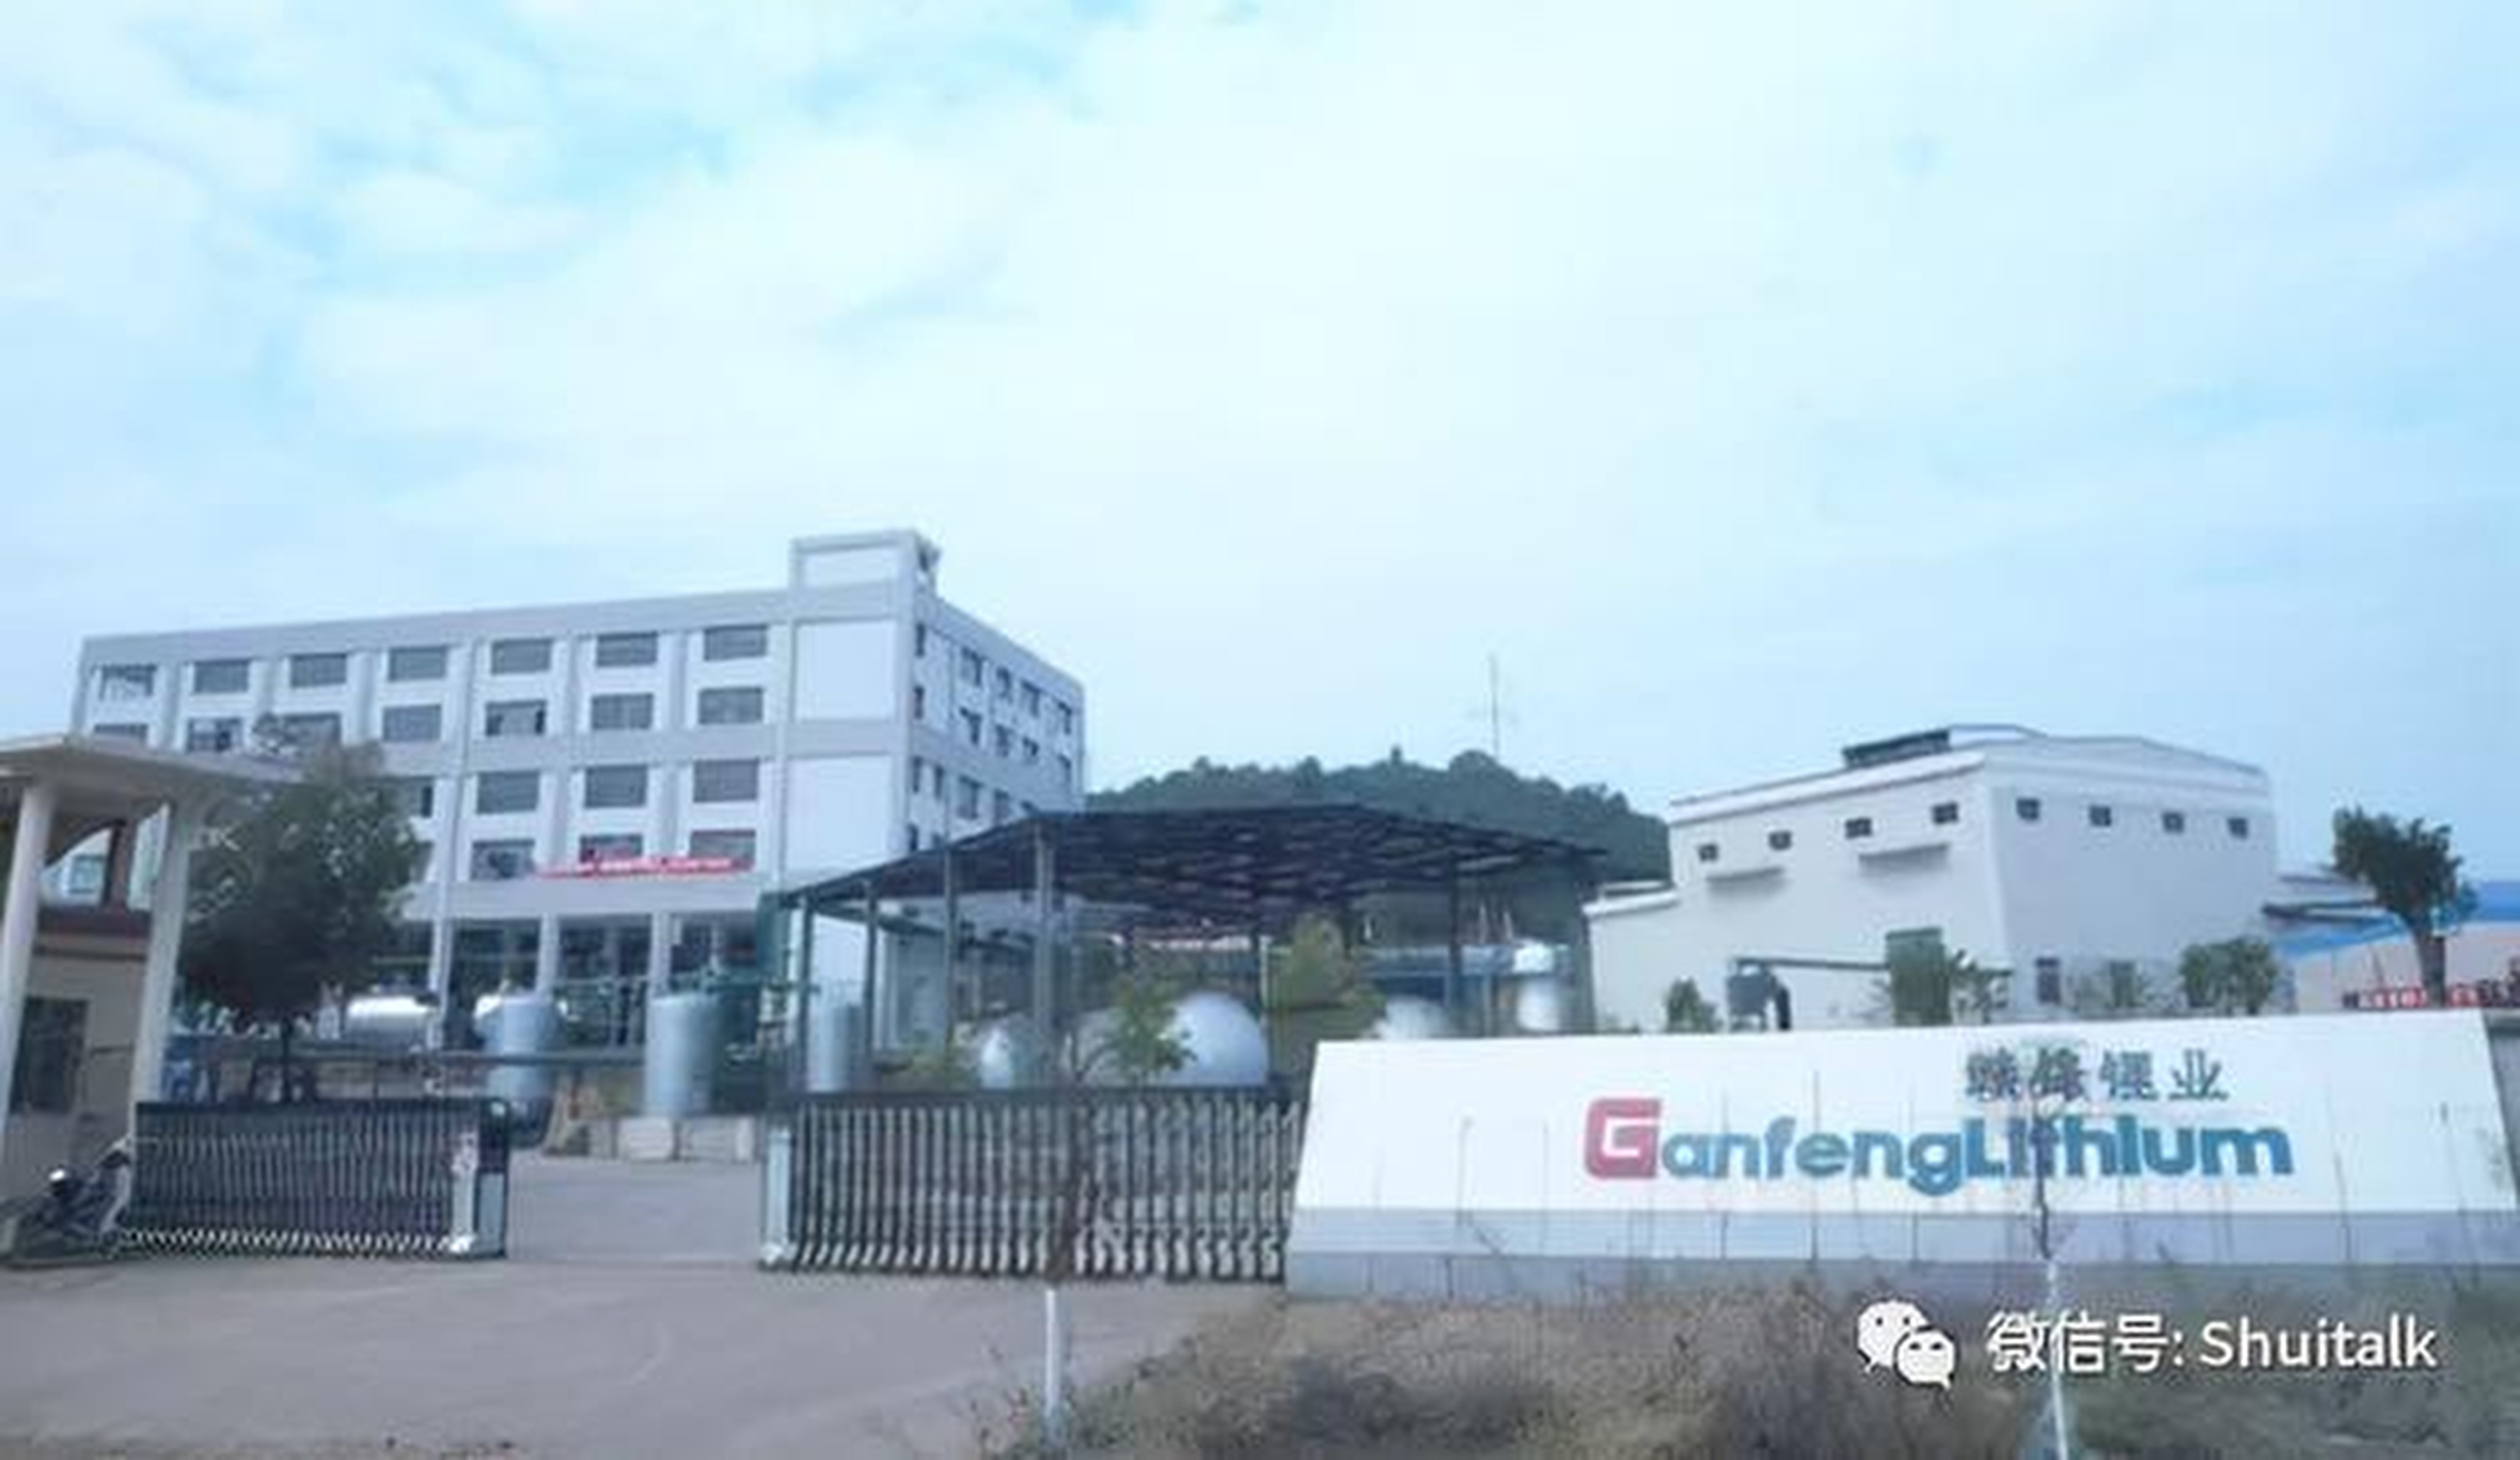 Ganfeng Lithium is China’s biggest producer of the key battery metal. Photo: Weixin